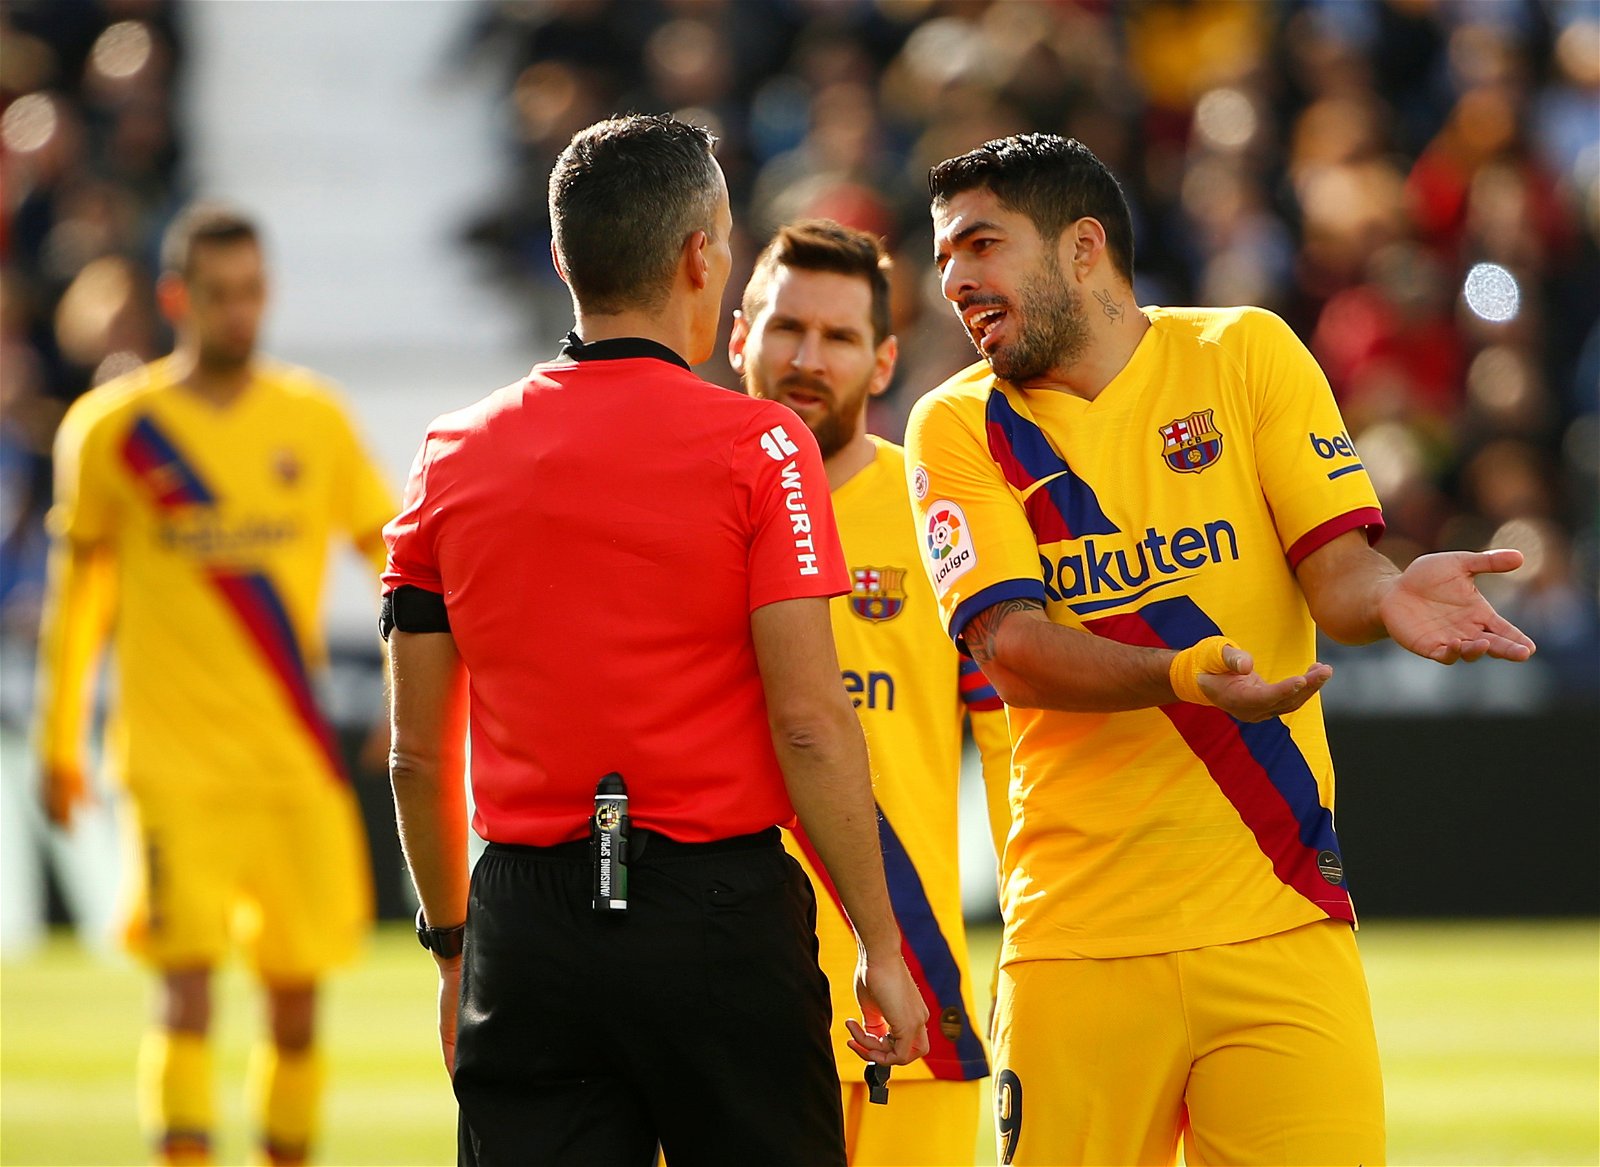 Season likely over for Barcelona's Luis Suarez after knee surgery